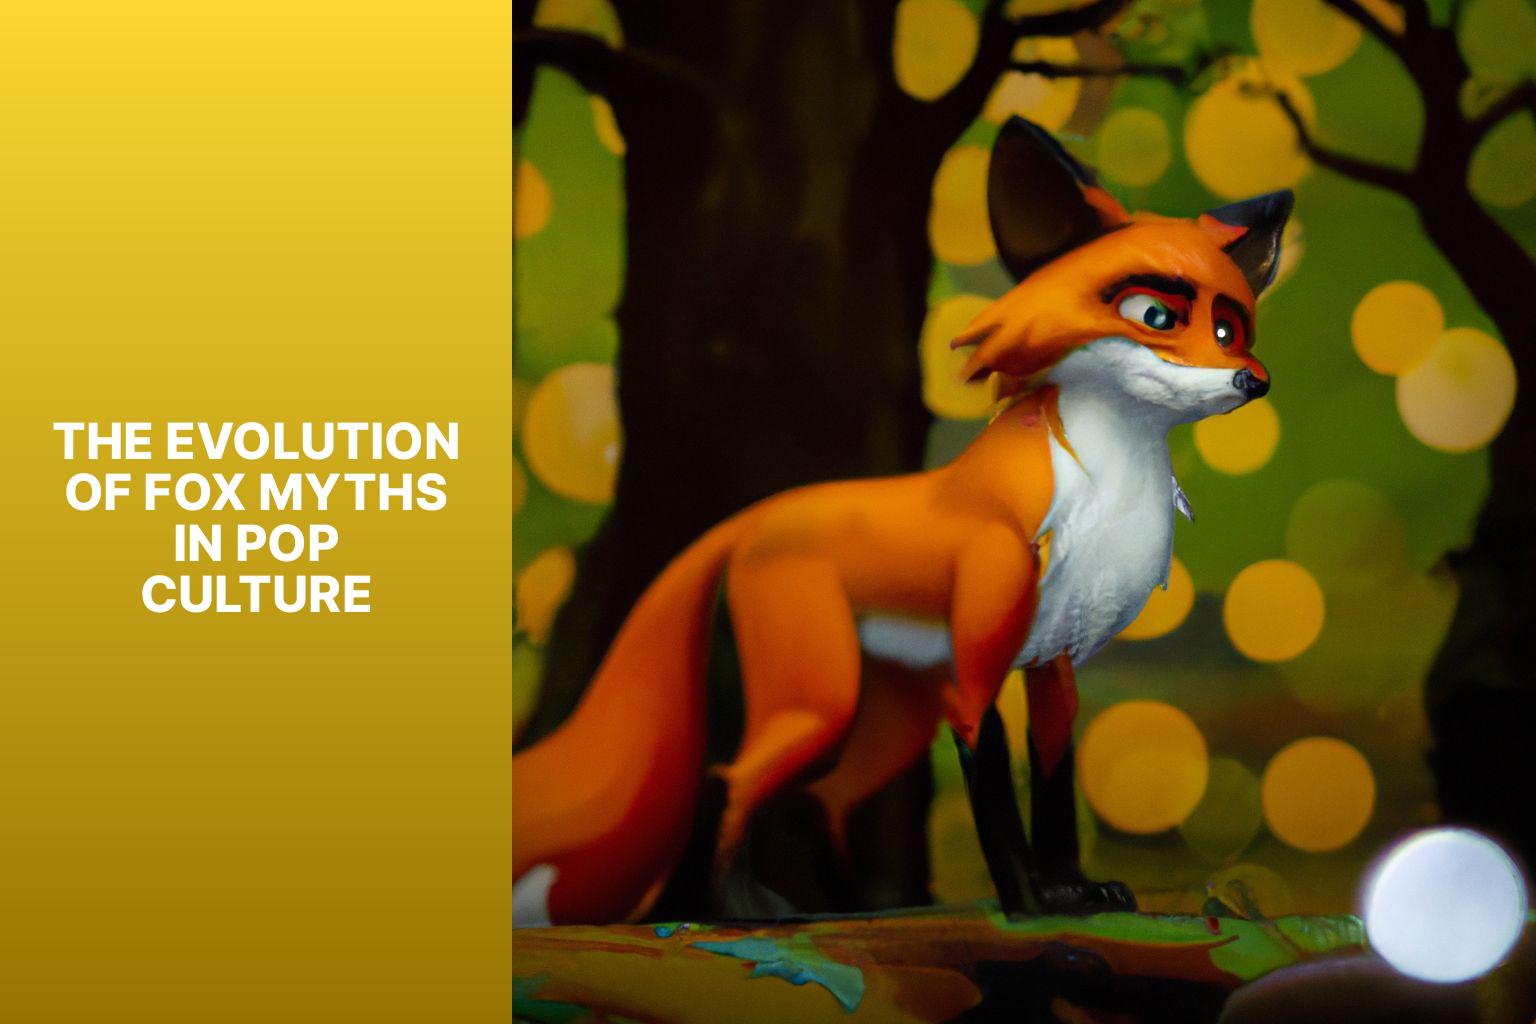 The Evolution of Fox Myths in Pop Culture - Fox Myths in Popular Culture 